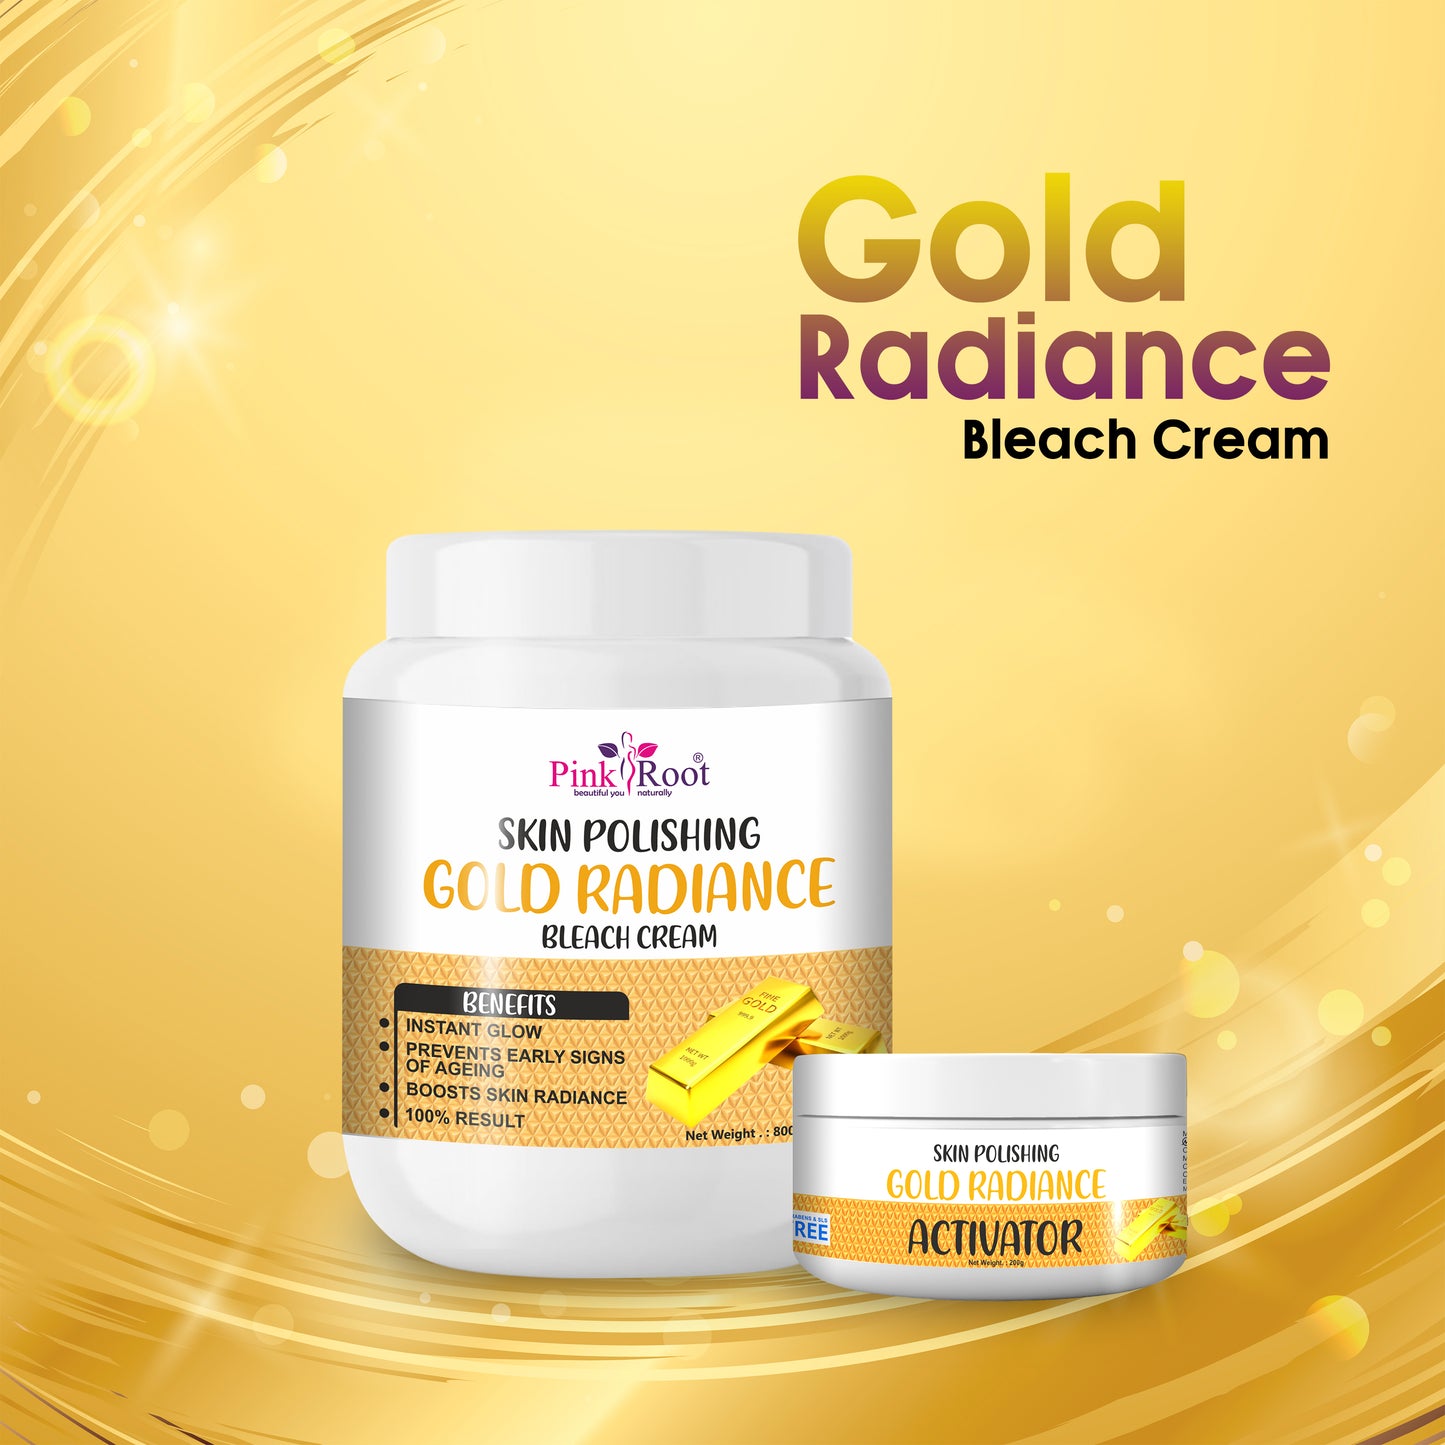 Pink Root Skin Polishing Gold Bleach Cream with Activator 1Kg| Reduces Signs of Ageing & Gives Brighter Polished Skin